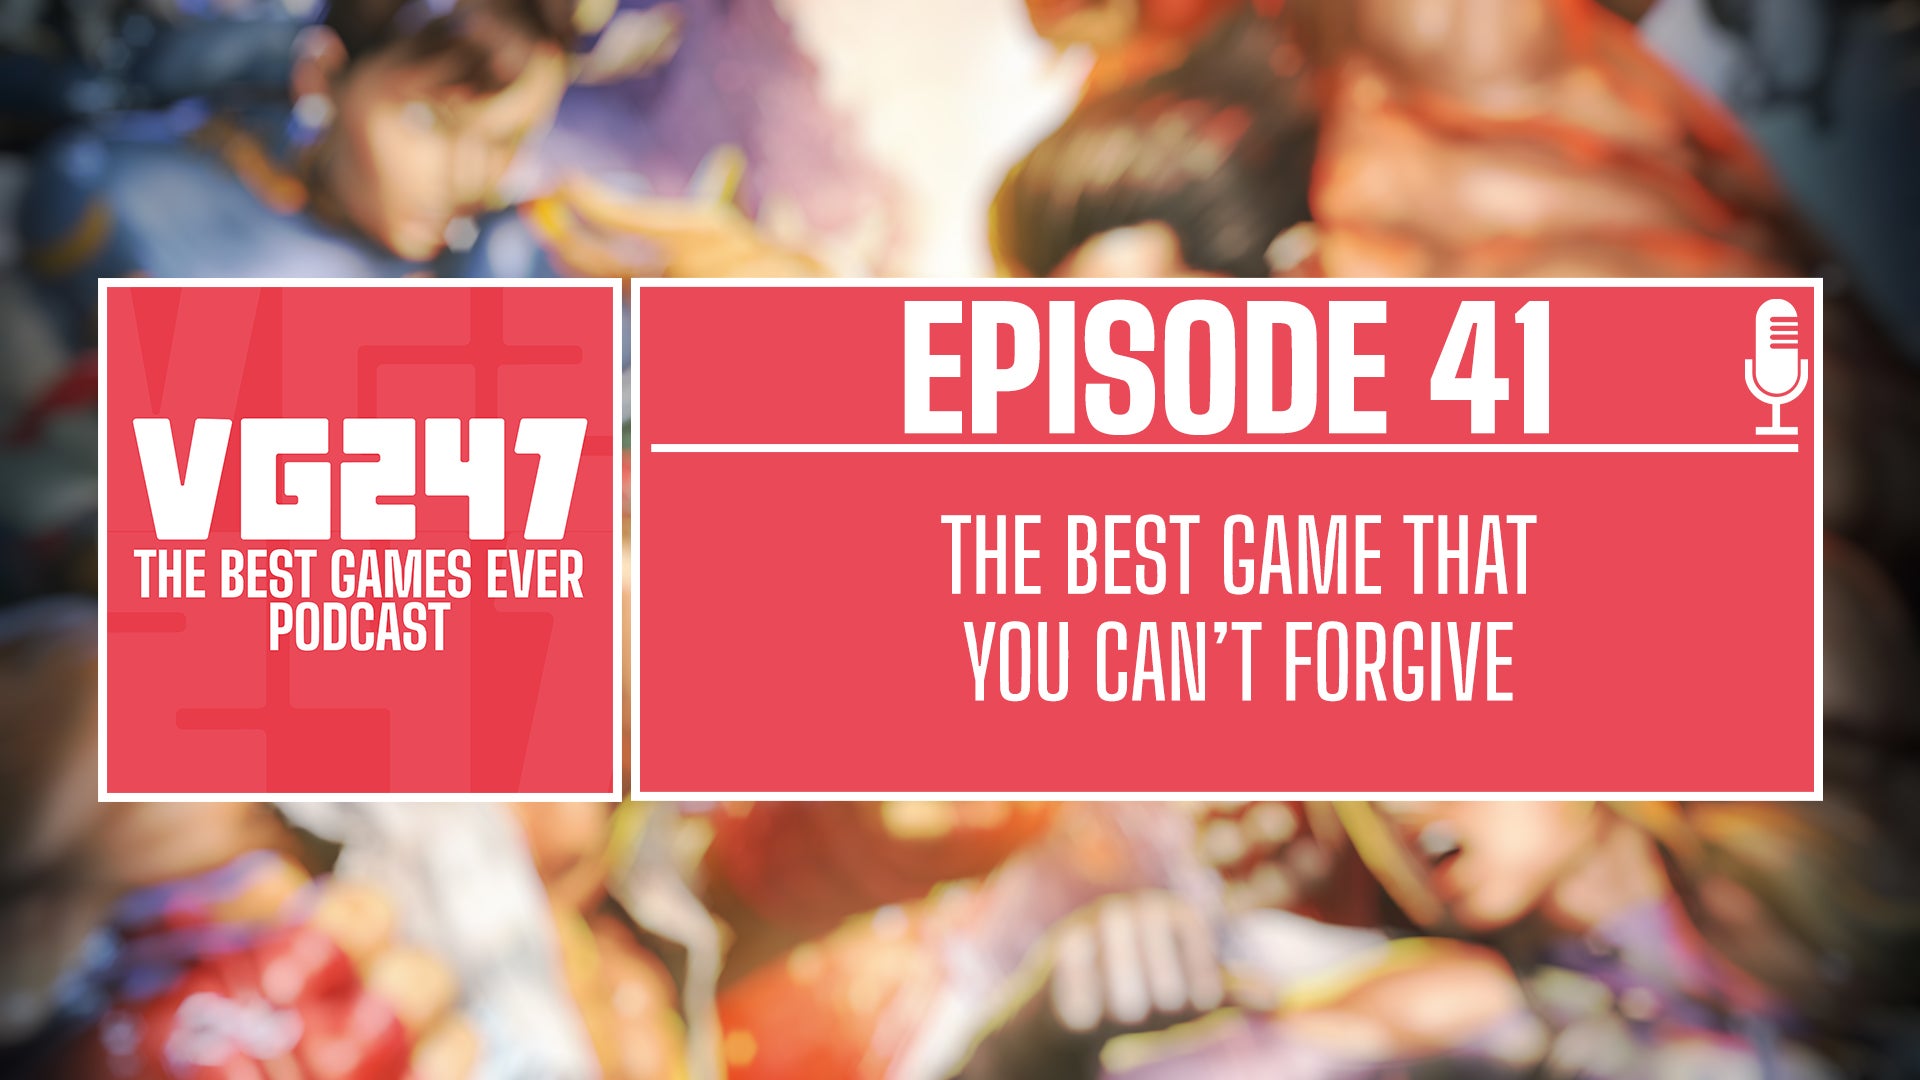 VG247's The Best Games Ever Podcast – Ep.41: The best game
that you can't forgive